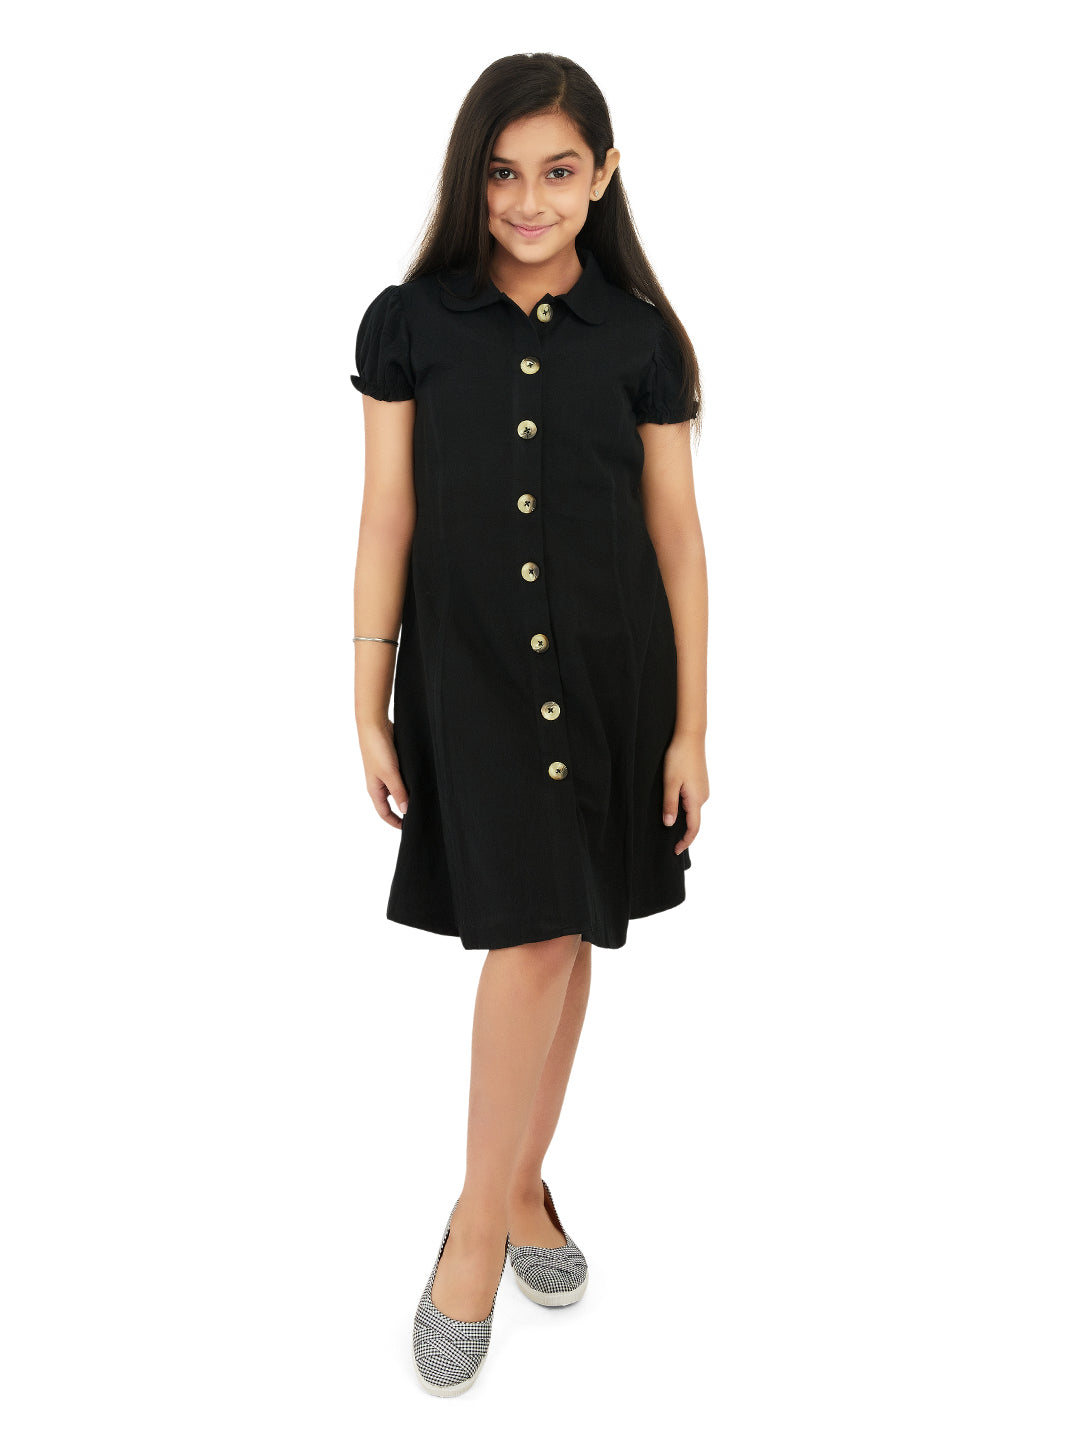 Olele® Bombay Black Cotton Linen Dress Tailored for 4 to 14 Years Girls